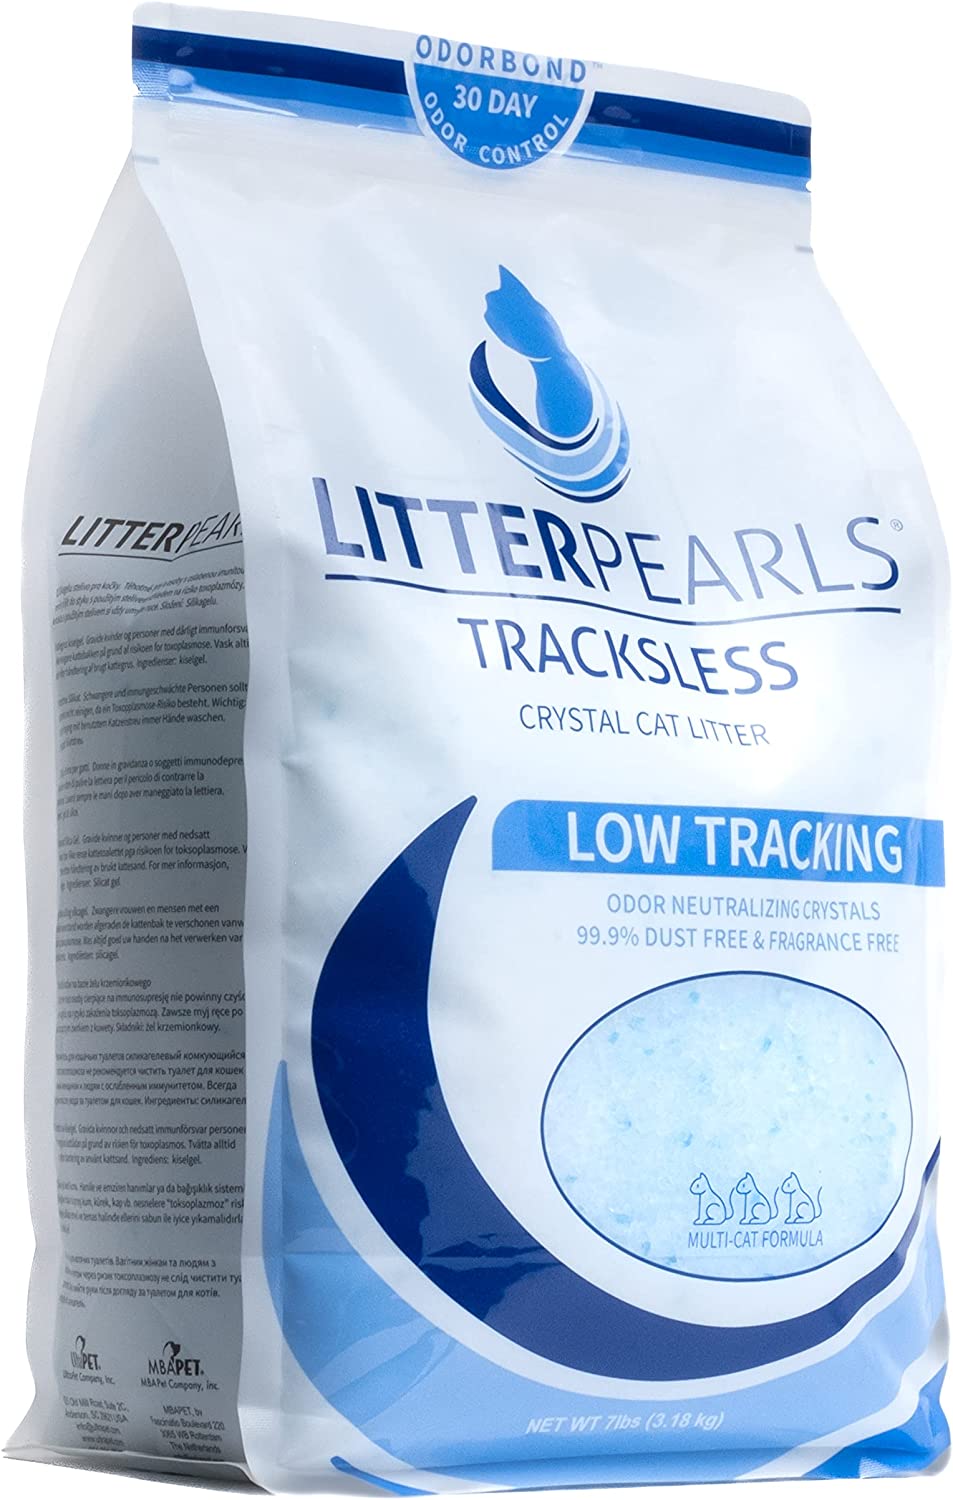 Litter Pearls Tracksless Unscented Non-Clumping Crystal Cat Litter